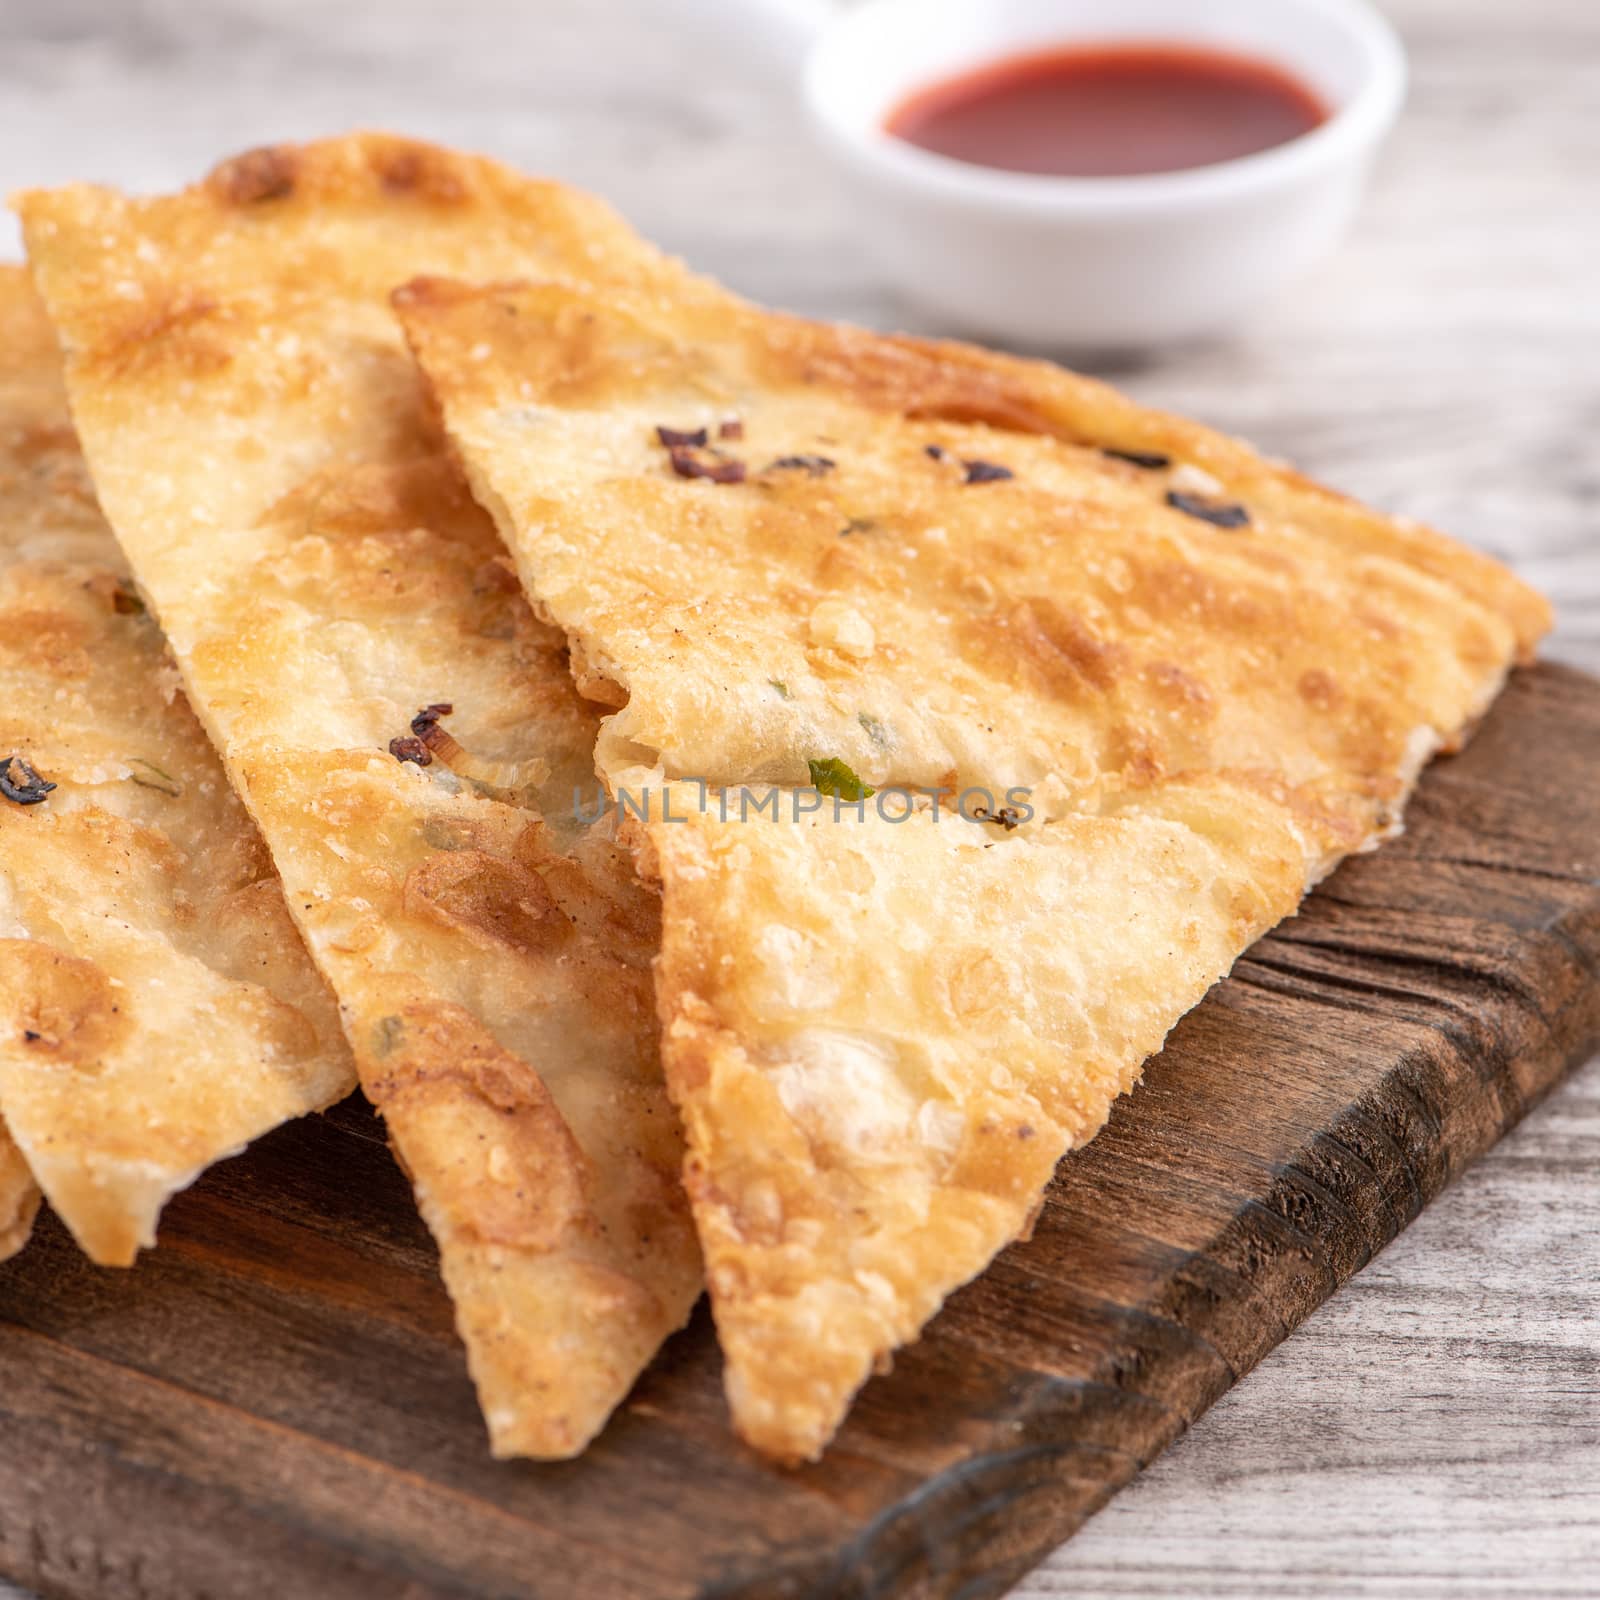 Taiwanese food - delicious flaky scallion pie pancakes on bright by ROMIXIMAGE